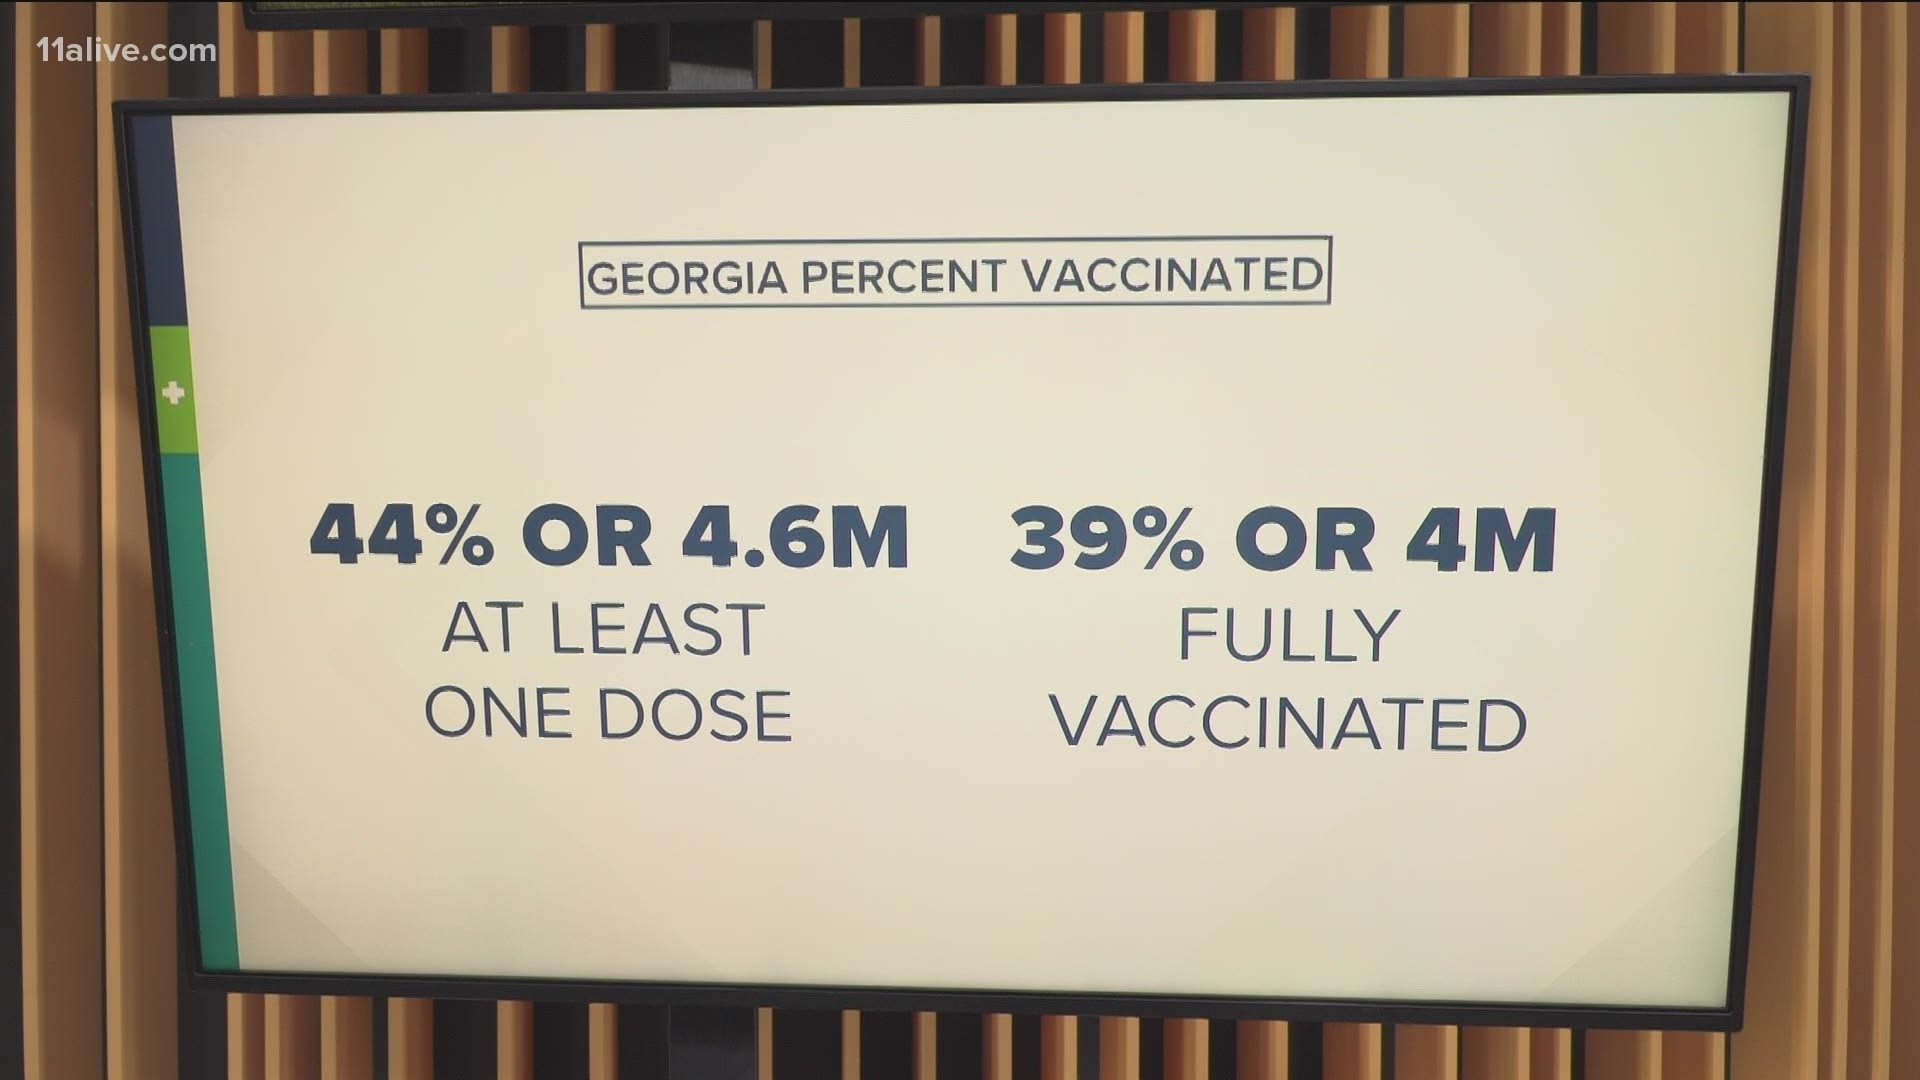 39% of Georgians are fully vaccinated.